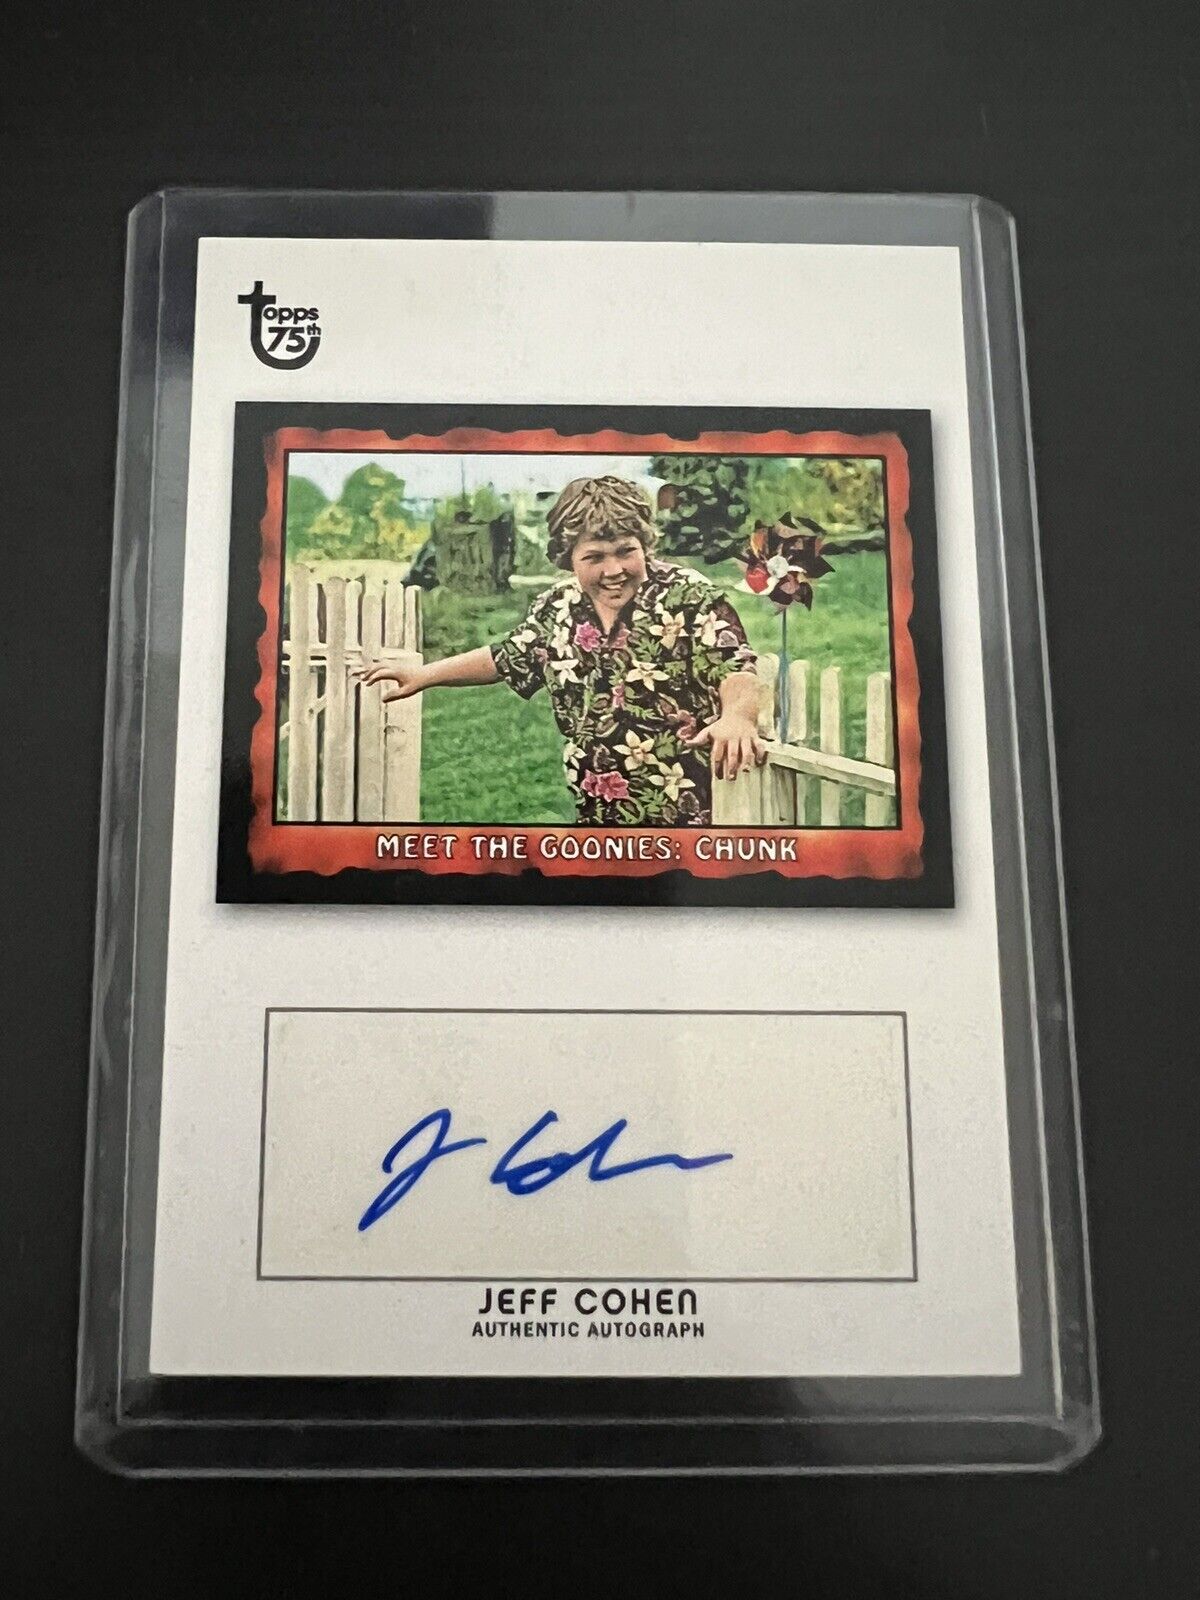 2013 Topps 75th Anniversary JEFF COHEN  CHUNK GOONIES Auto autographed Signed